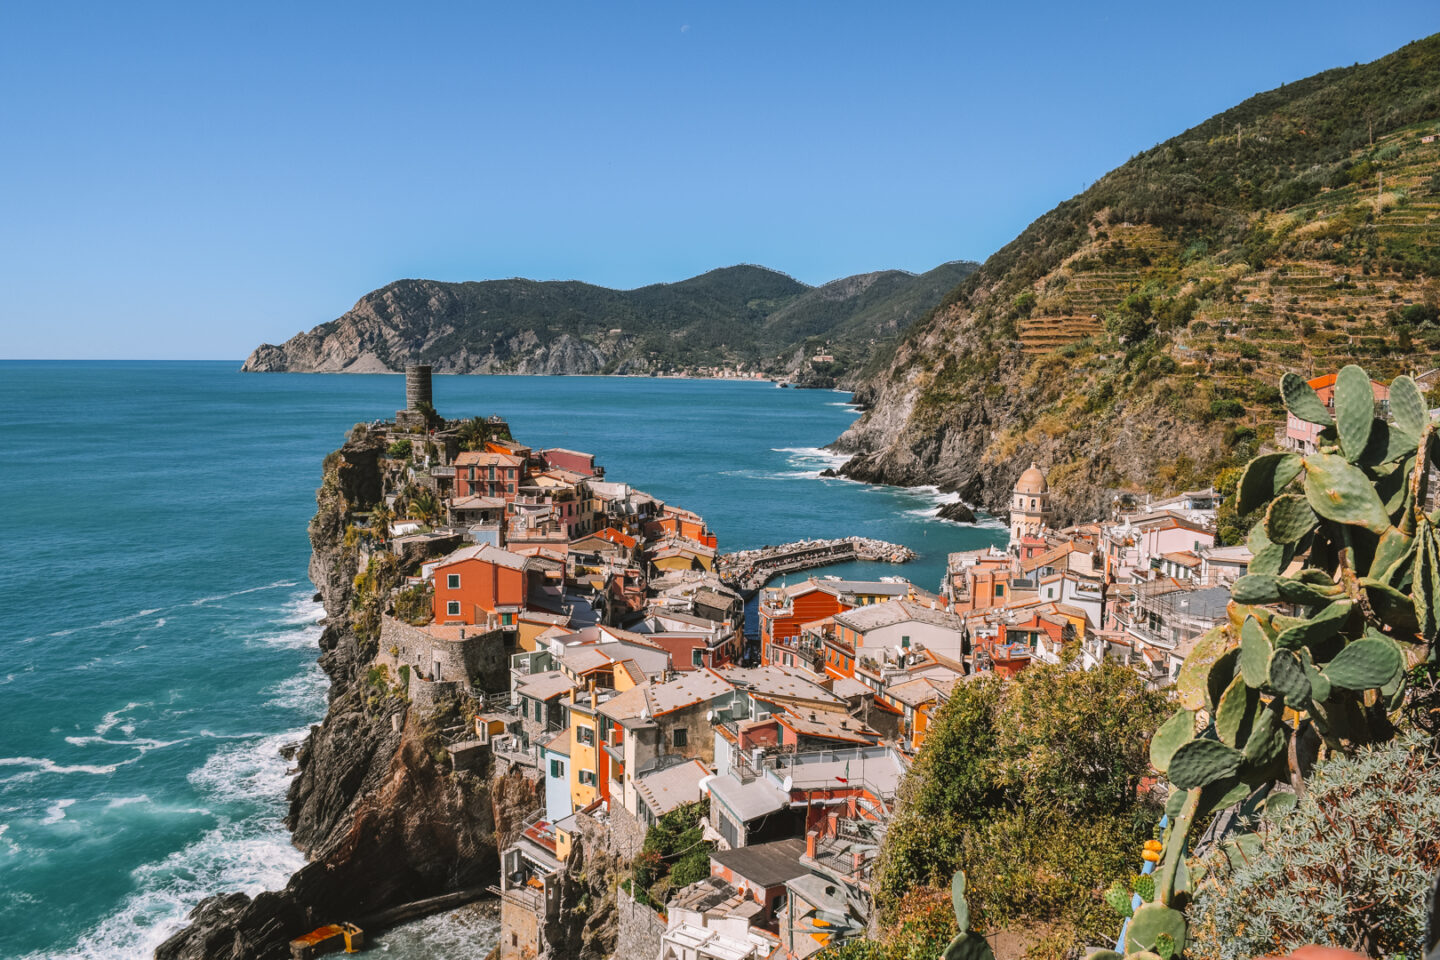 The view over Vernazza, Cinque Terre, one of the 5 Cinque Terre towns